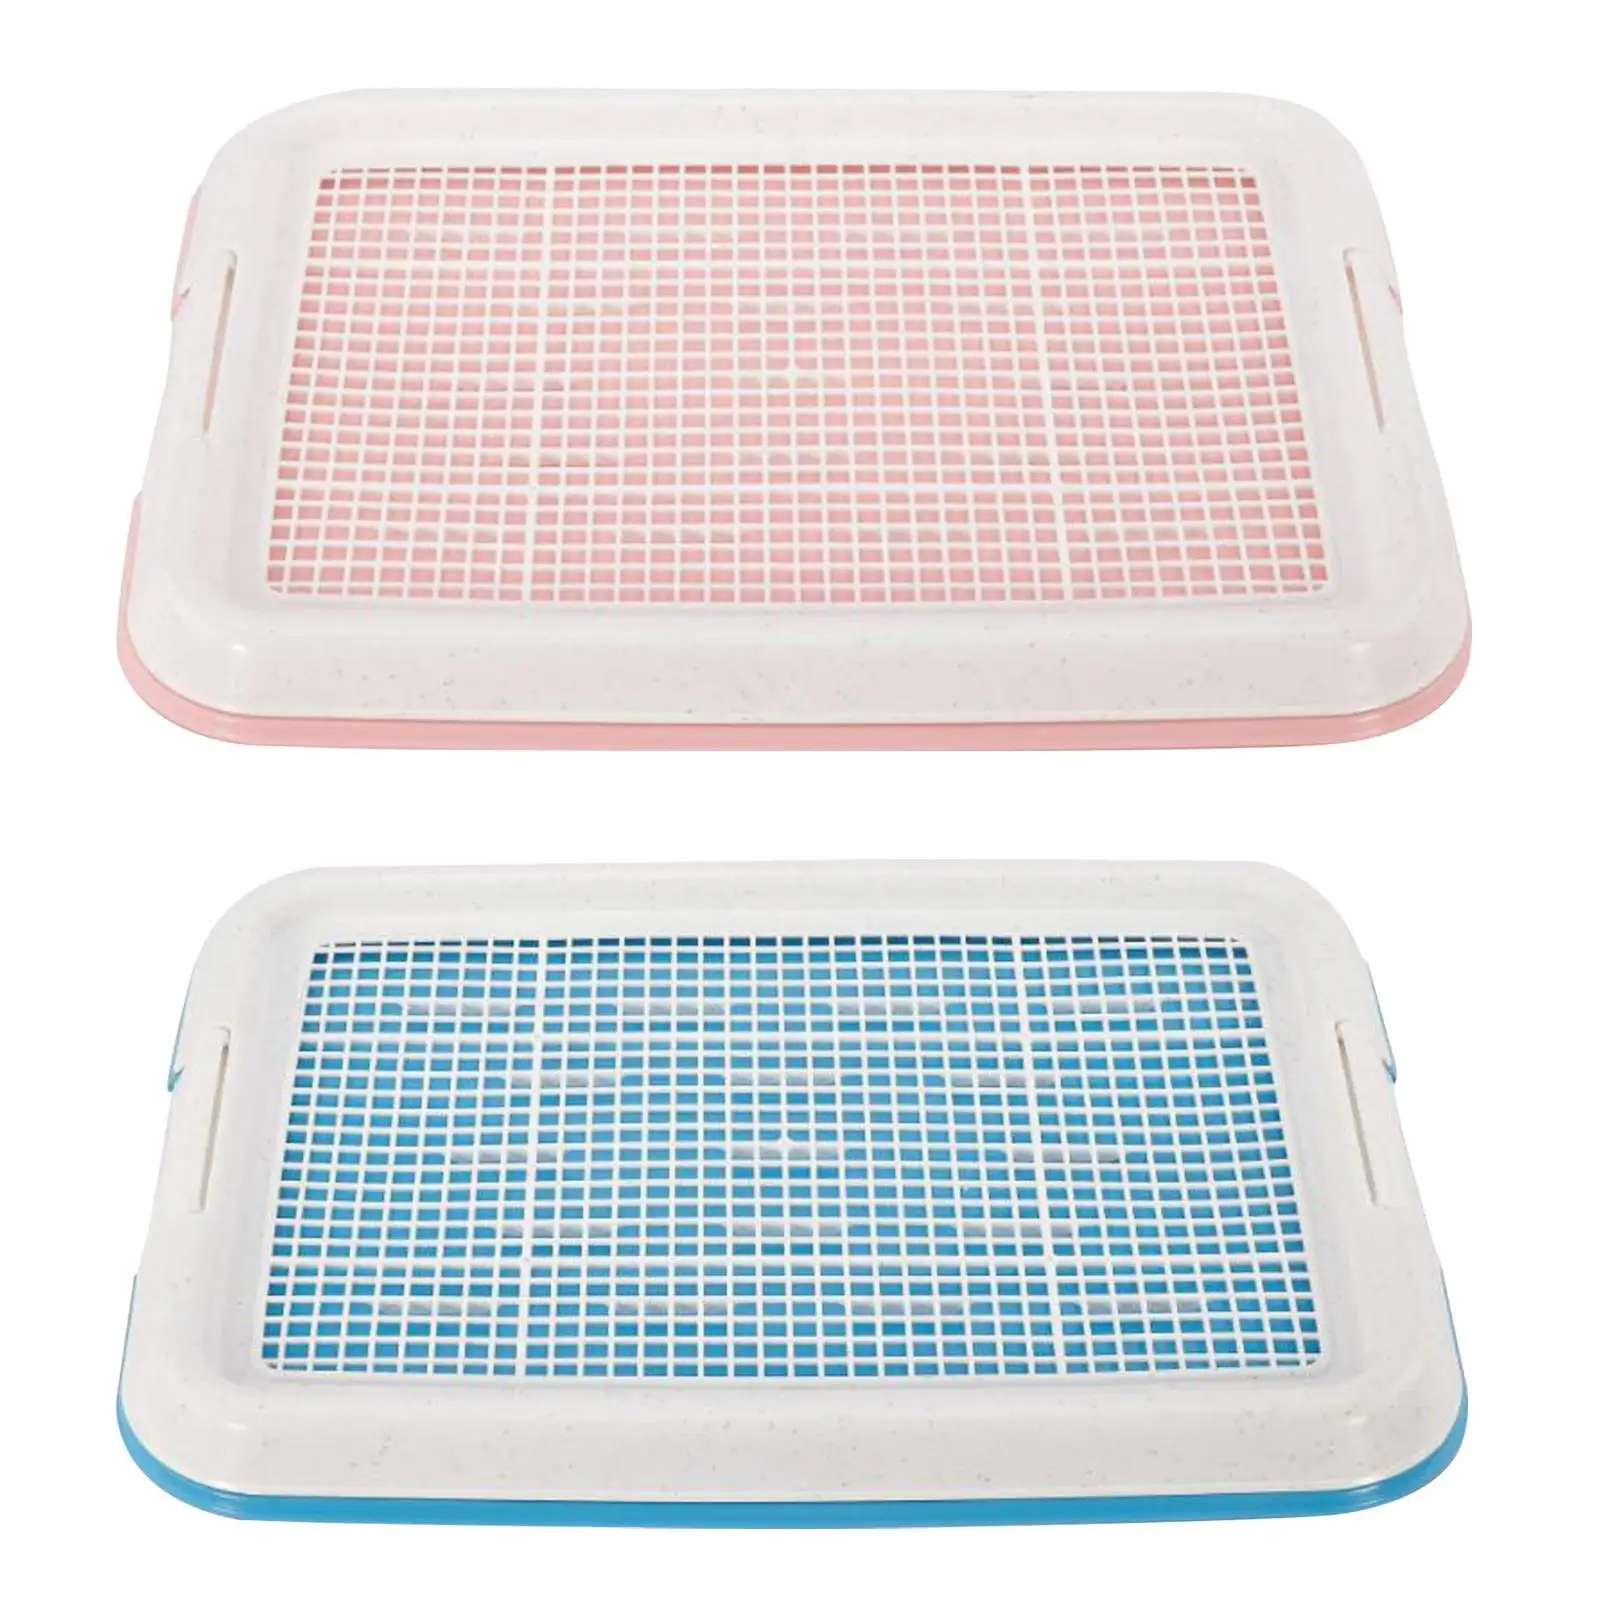 Dog Potty Toilet Training Tray Indoor Outdoor 18.5x13.8 inch Mesh Potty Training Tray Dog Potty Pan for Small Size Dogs Puppies